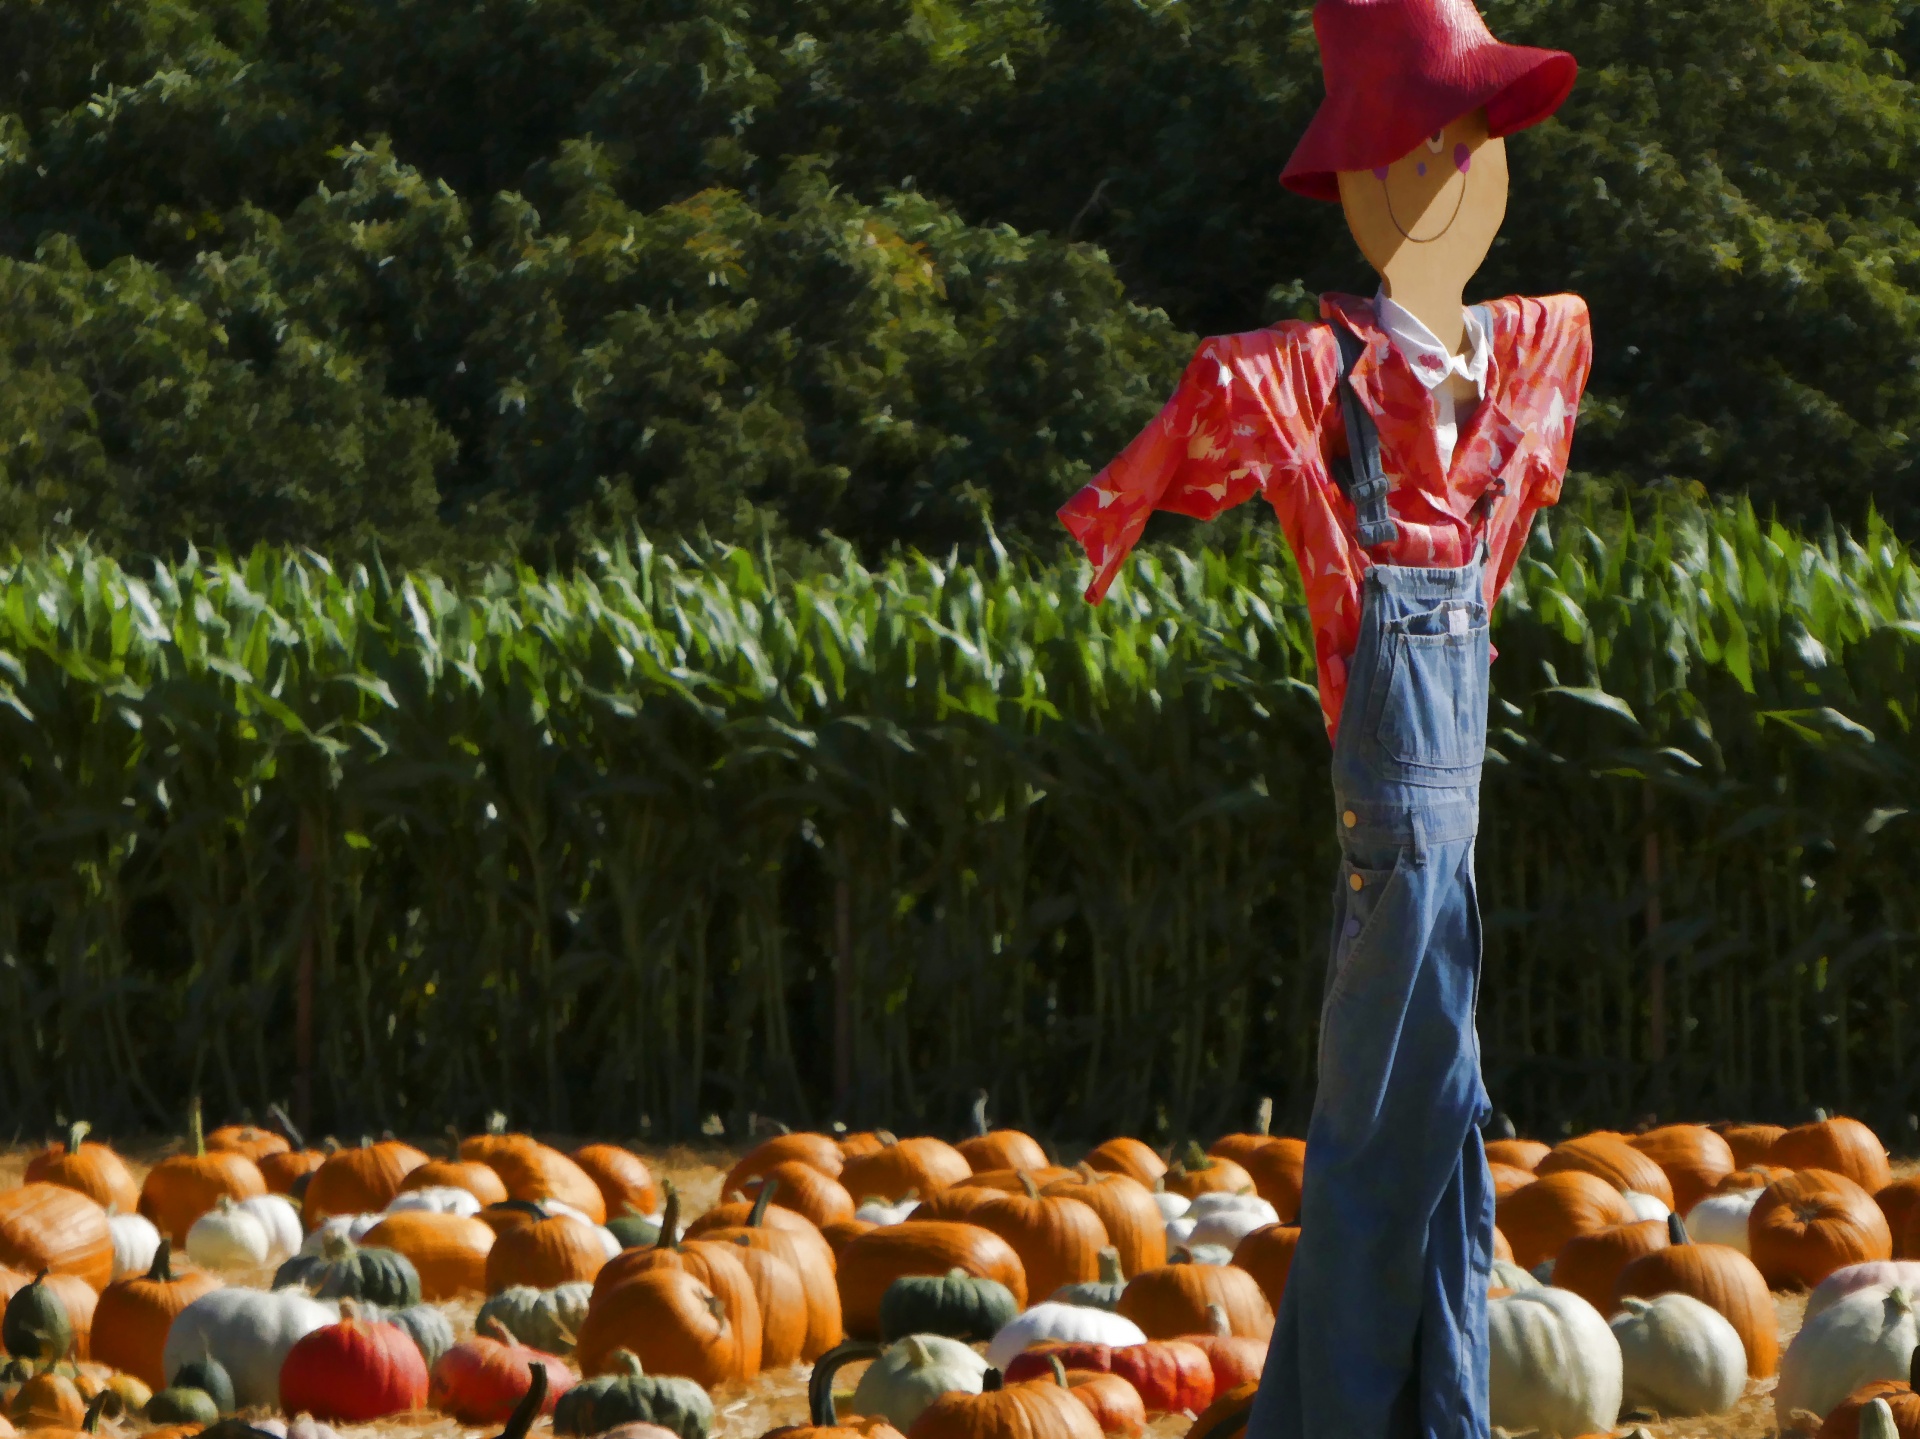 scarcrow stands among assorted pumpkins with corn stalks growing in background